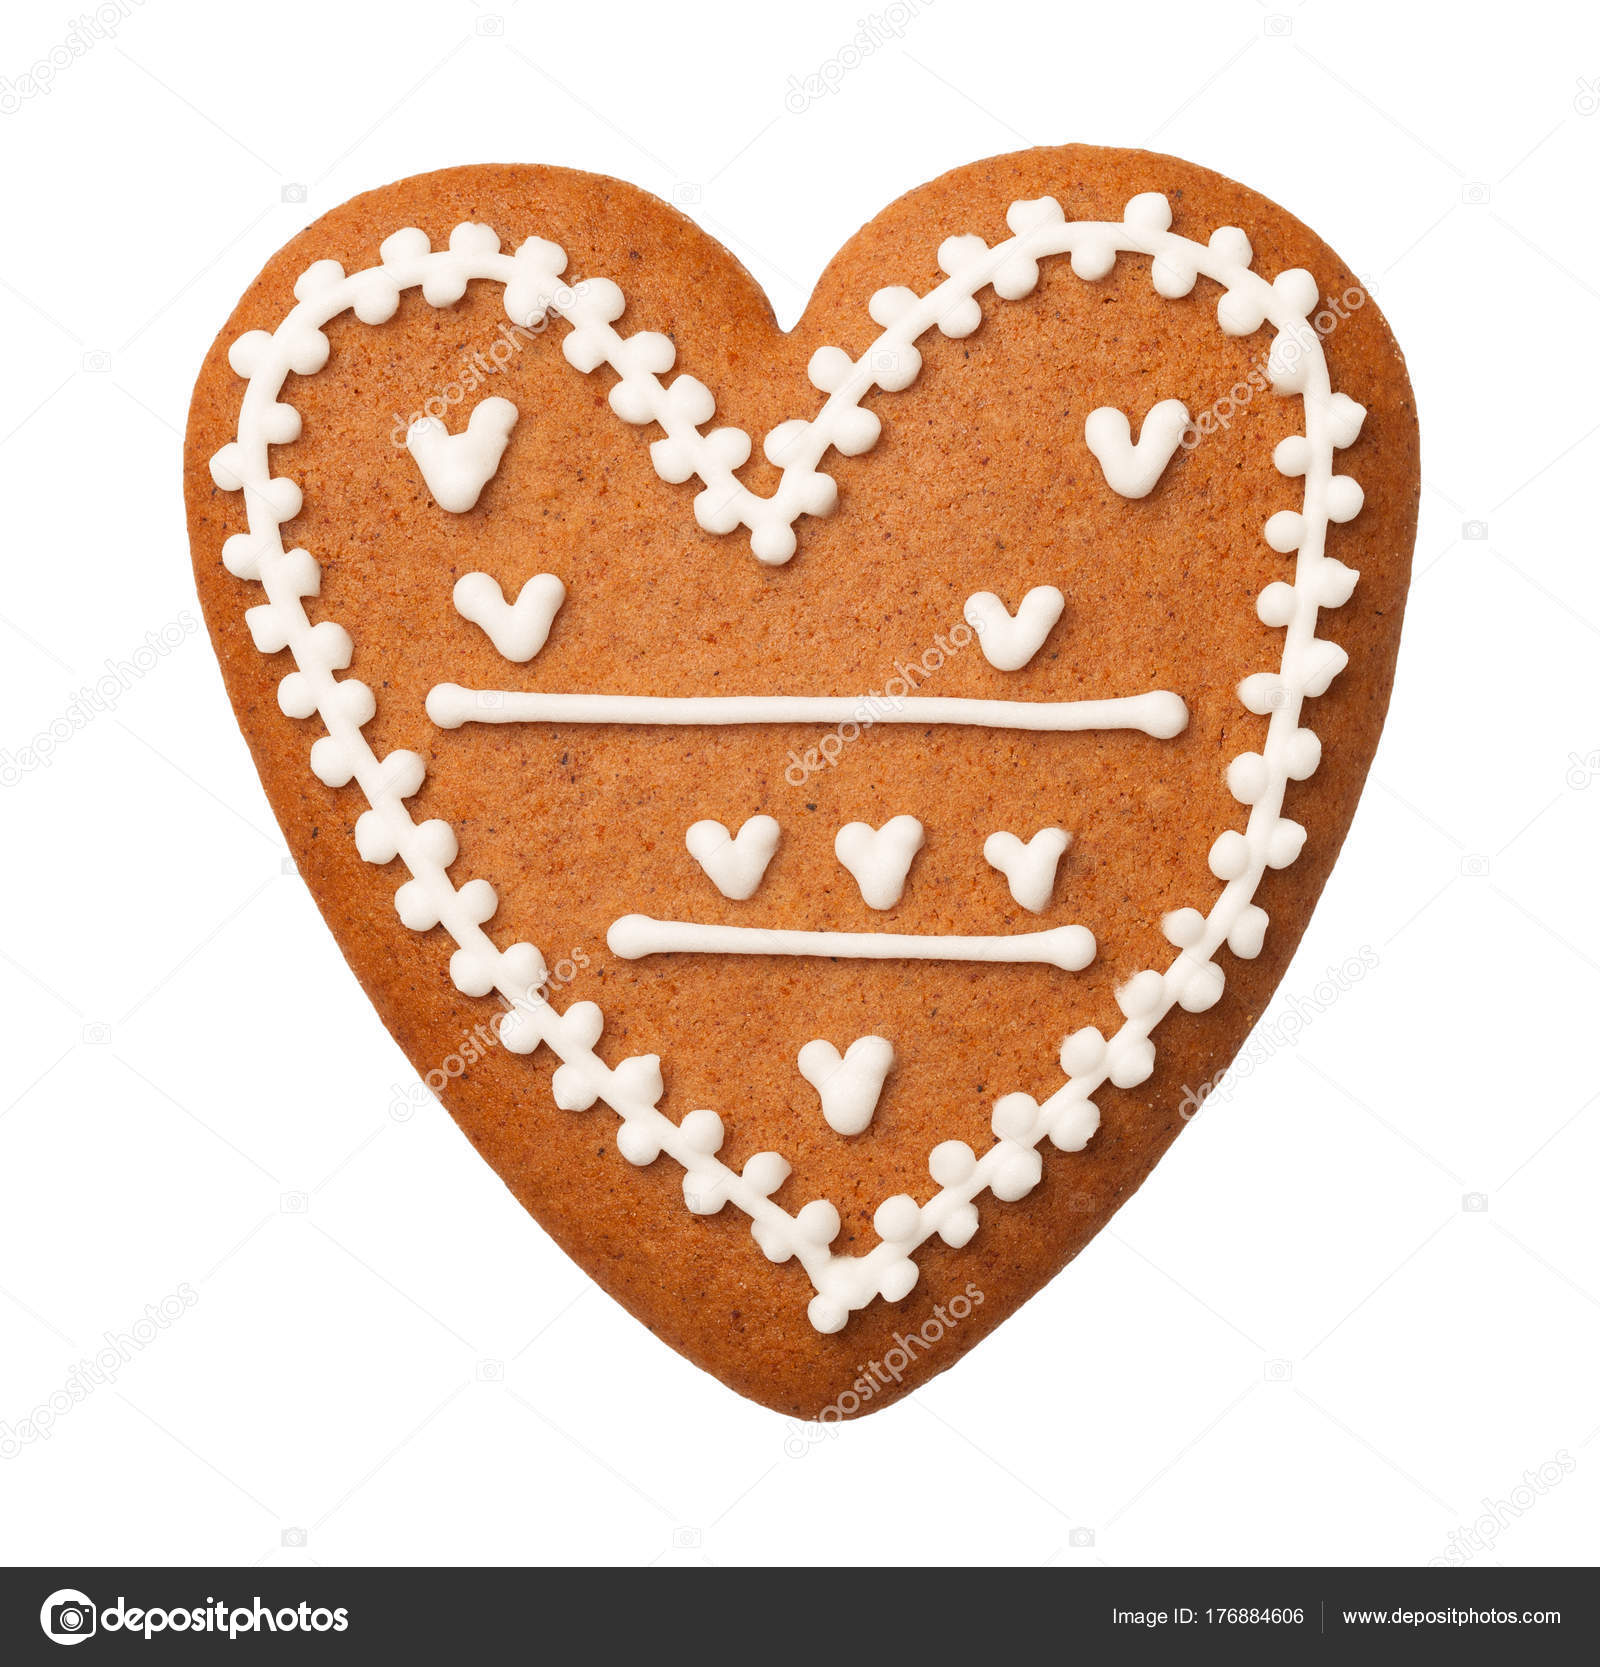 Gingerbread Heart Isolated on White Background — Stock Photo ...